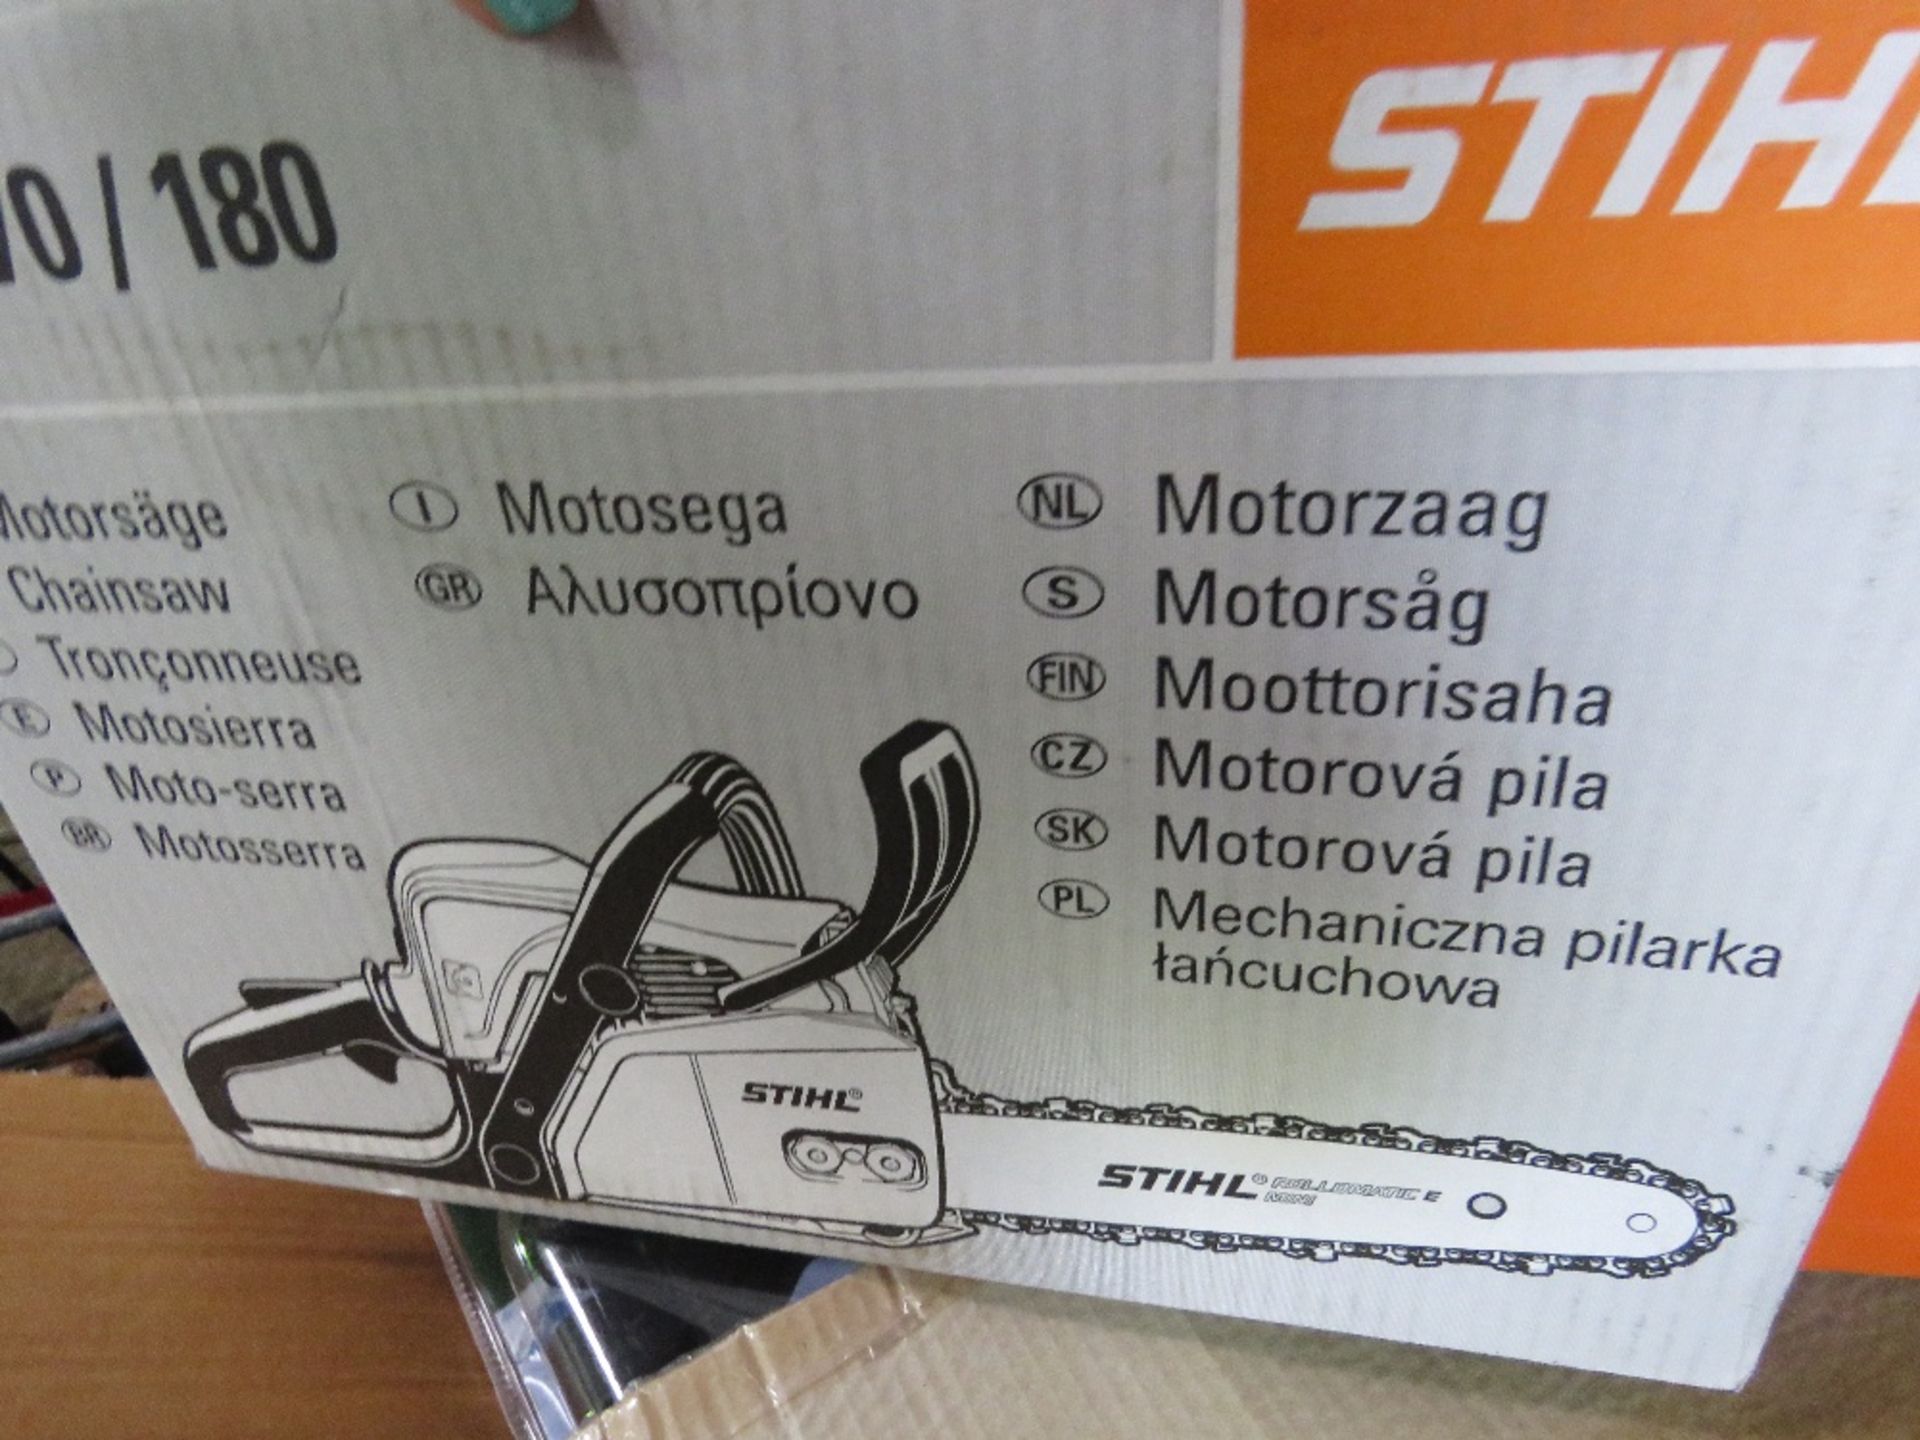 STIHL MS170 PETROL ENGINED CHAINSAW, BOXED, UNUSED - Image 2 of 2